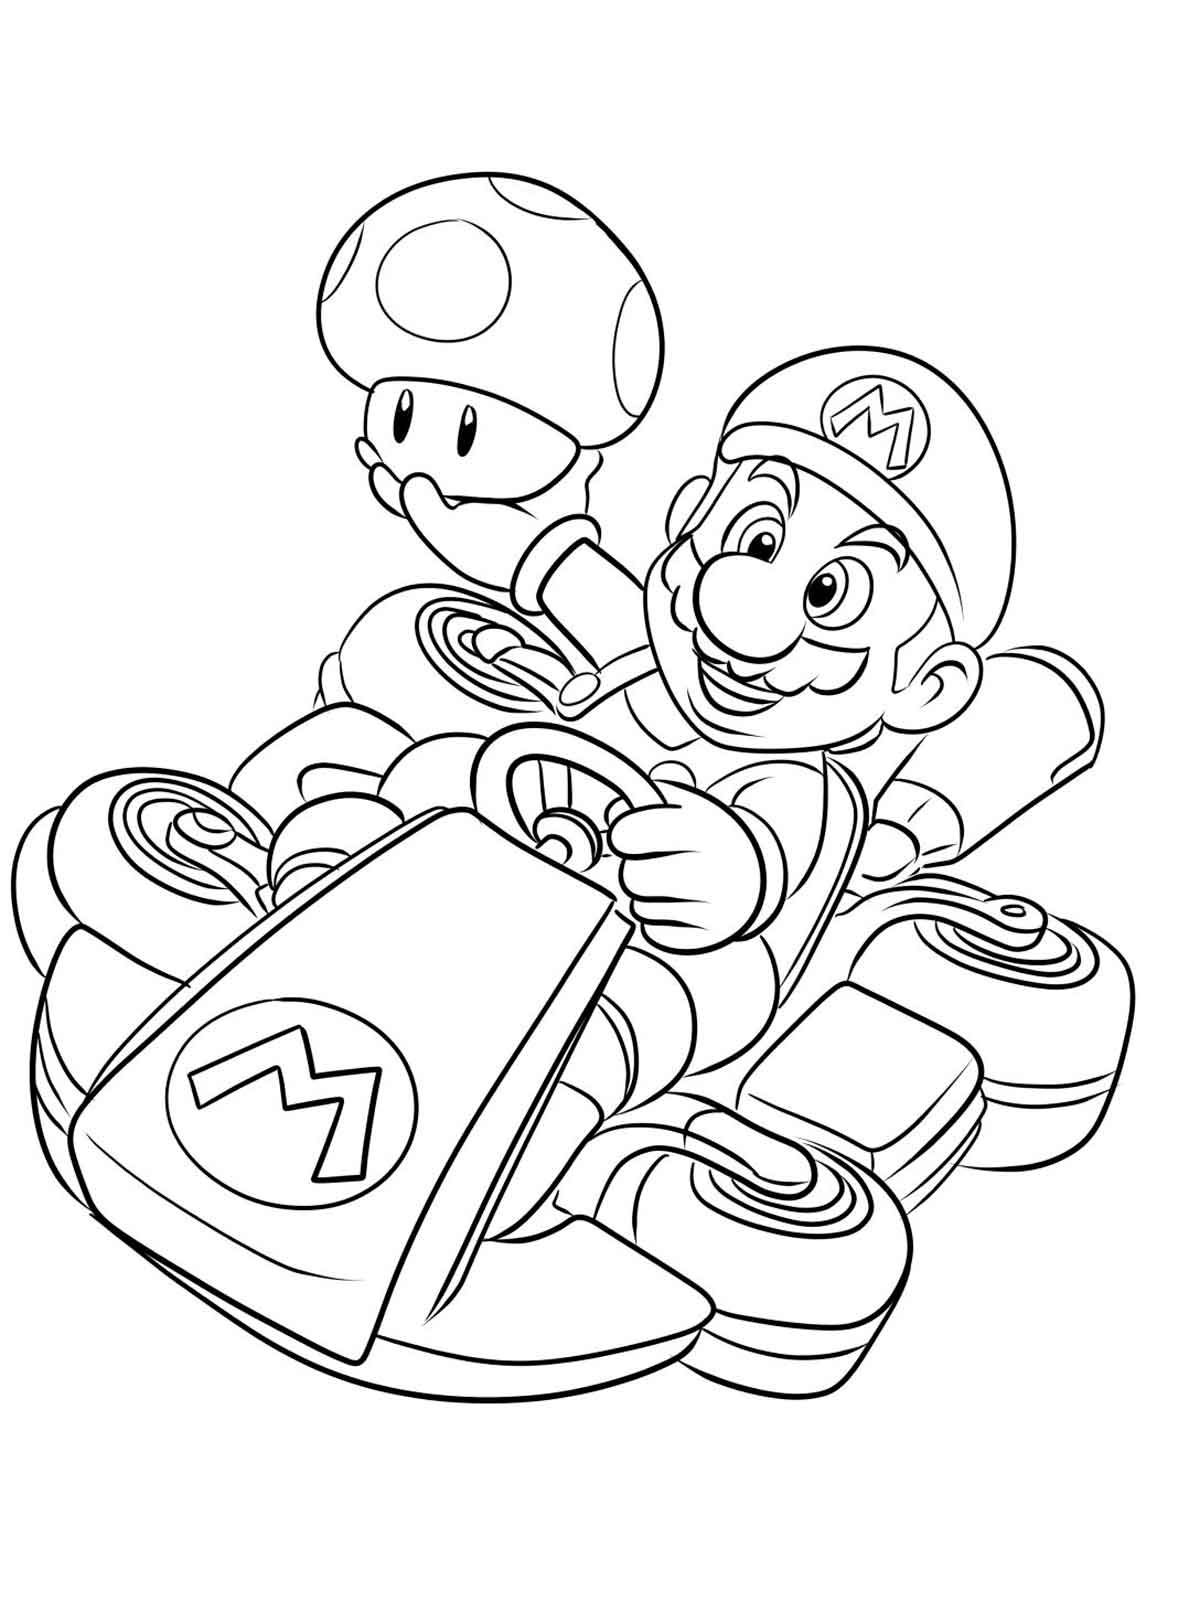 Mario Kart coloring pages